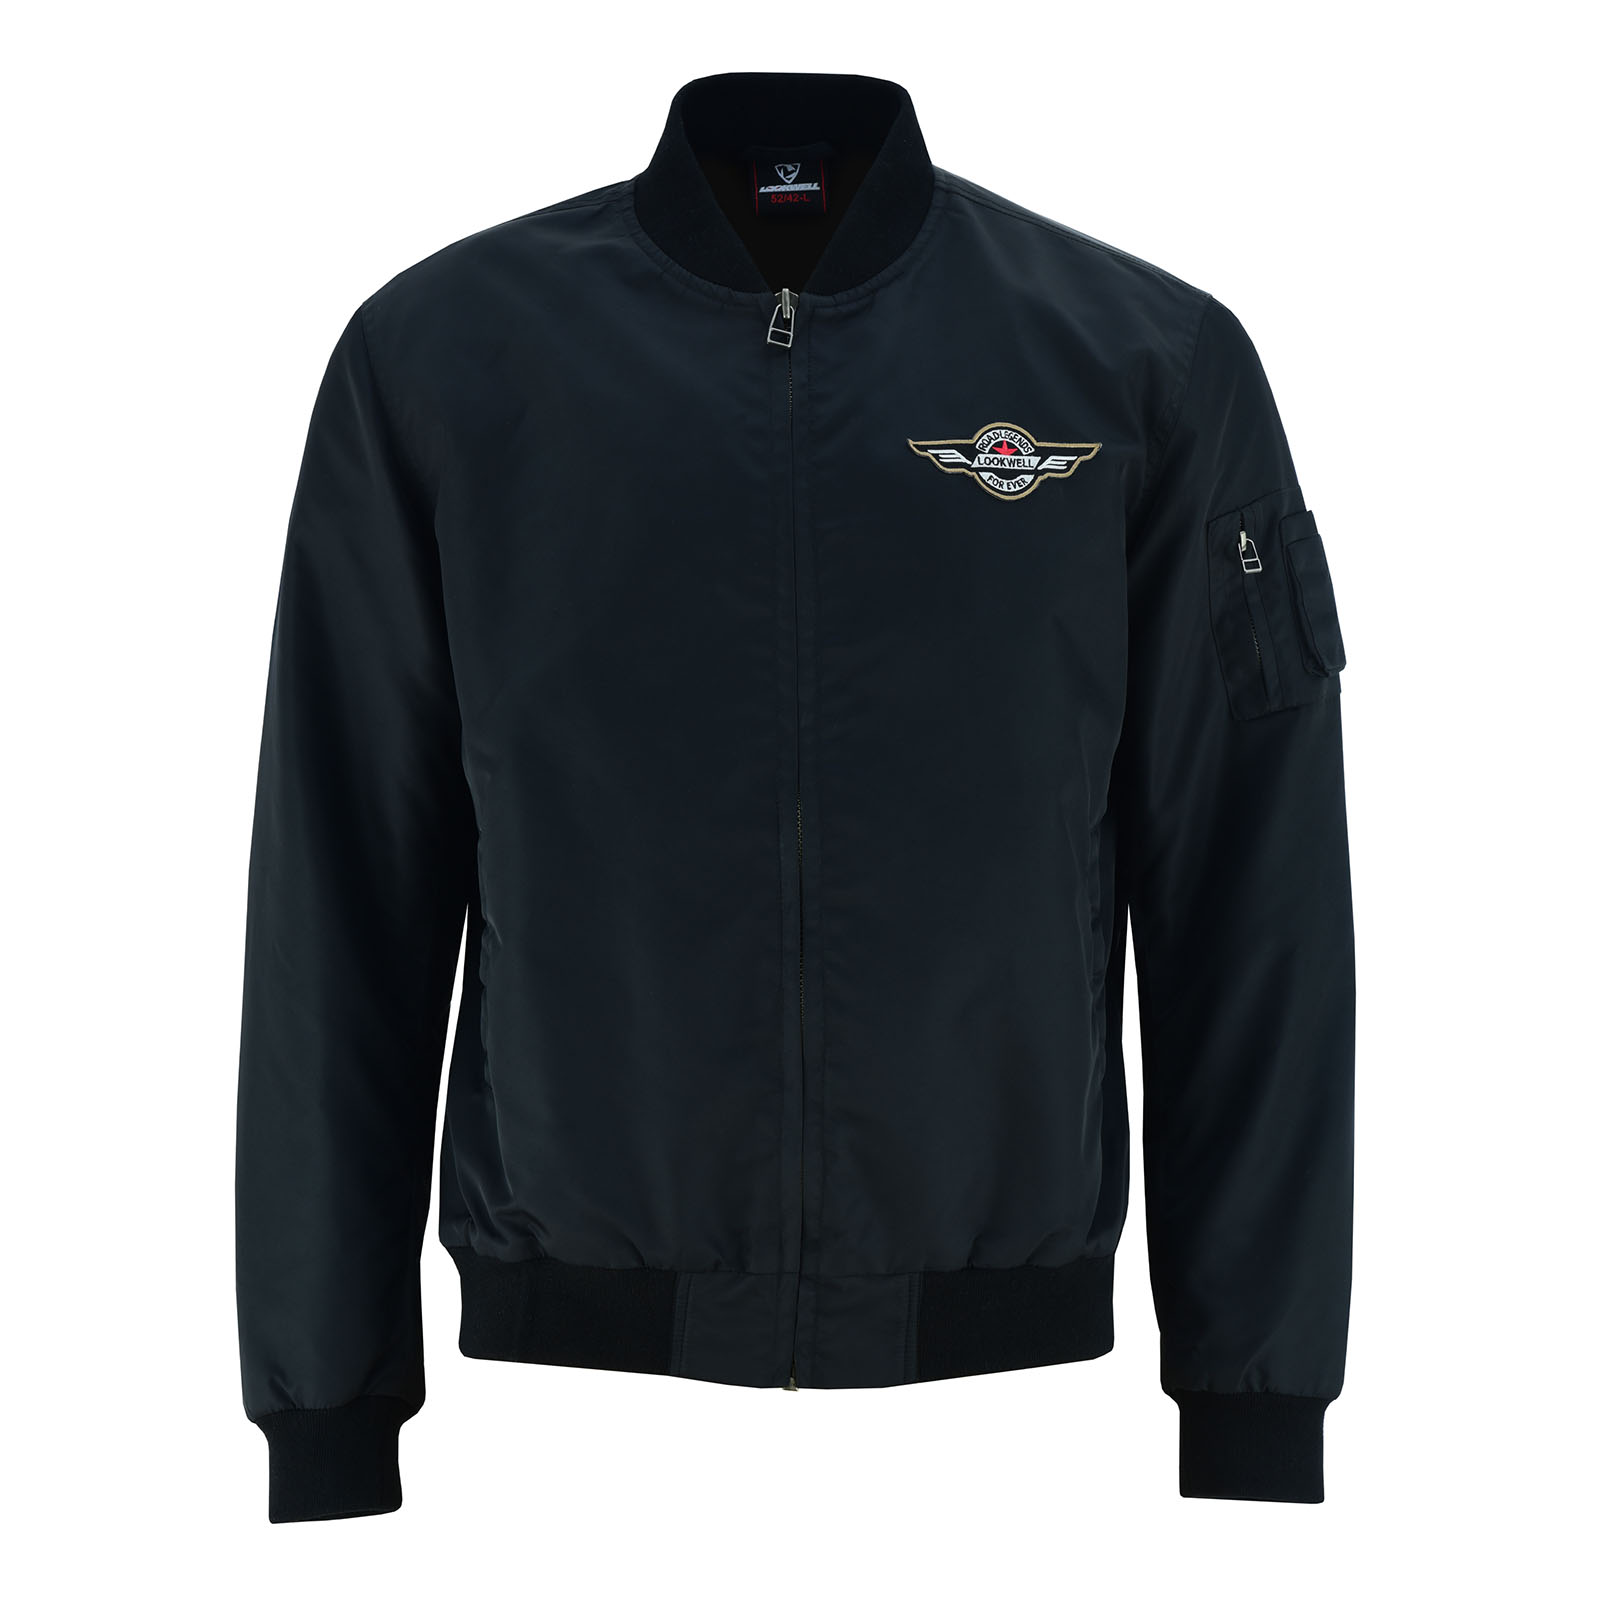 Thunder - Lookwell Motorcycle Apparel